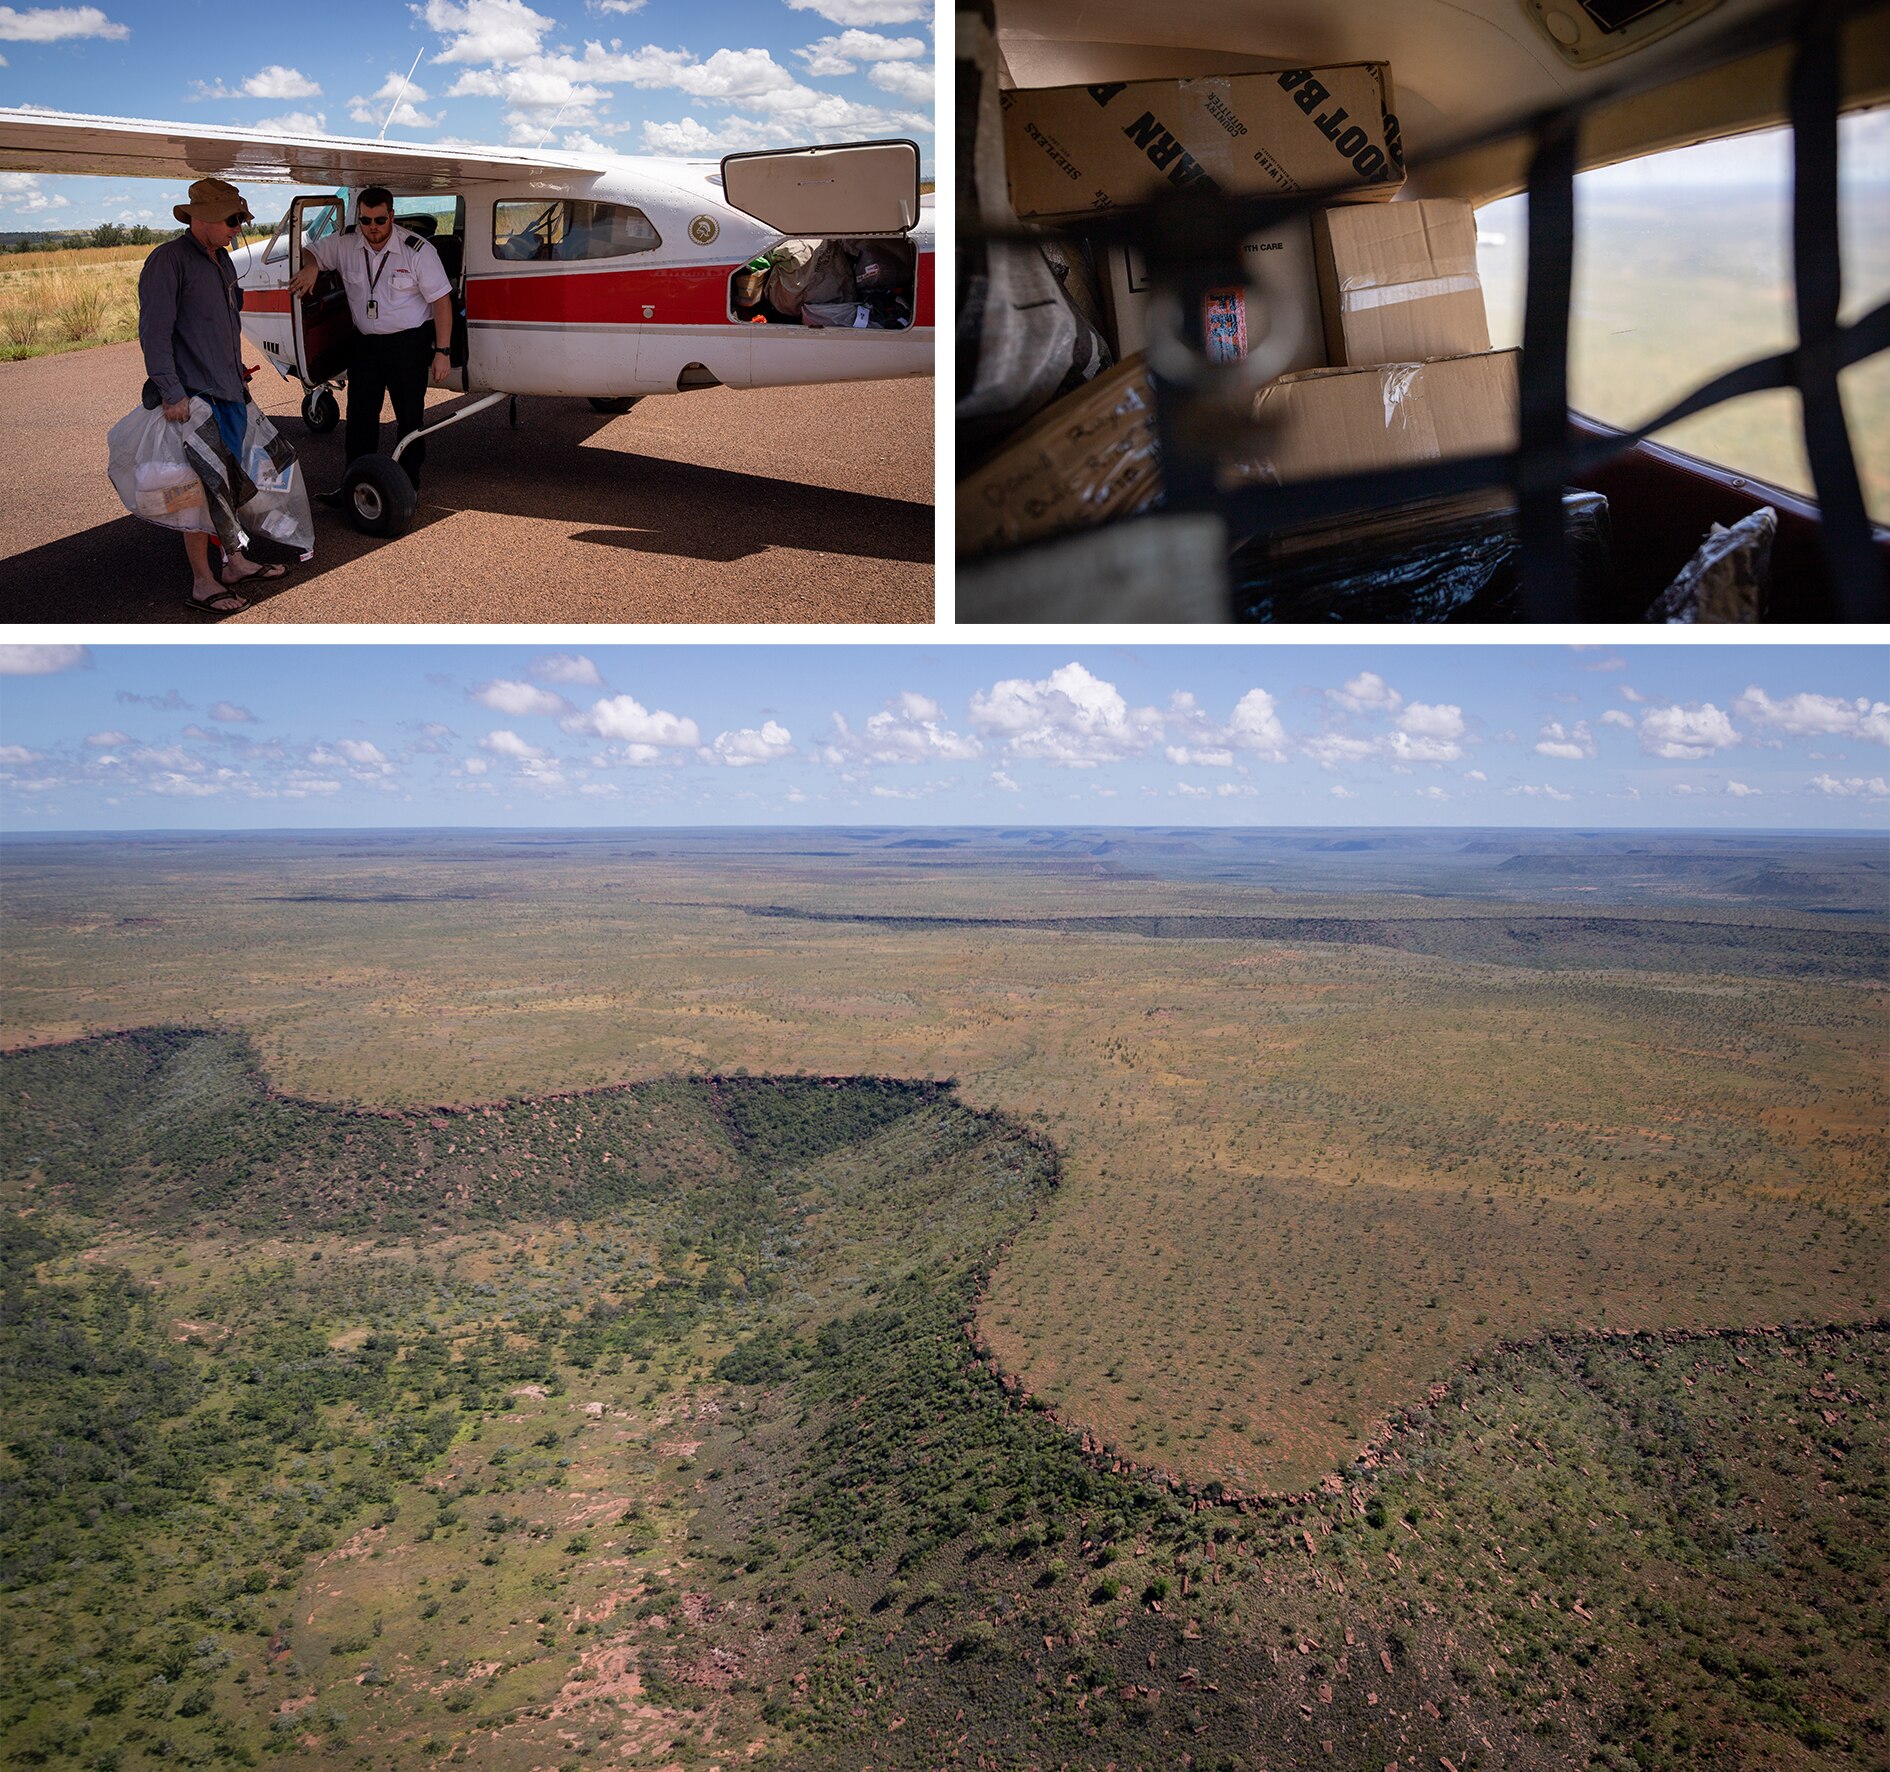 A grid of three photos showing a small plane filled with parcels and boxes and an aerial view of vast outback escarpments.